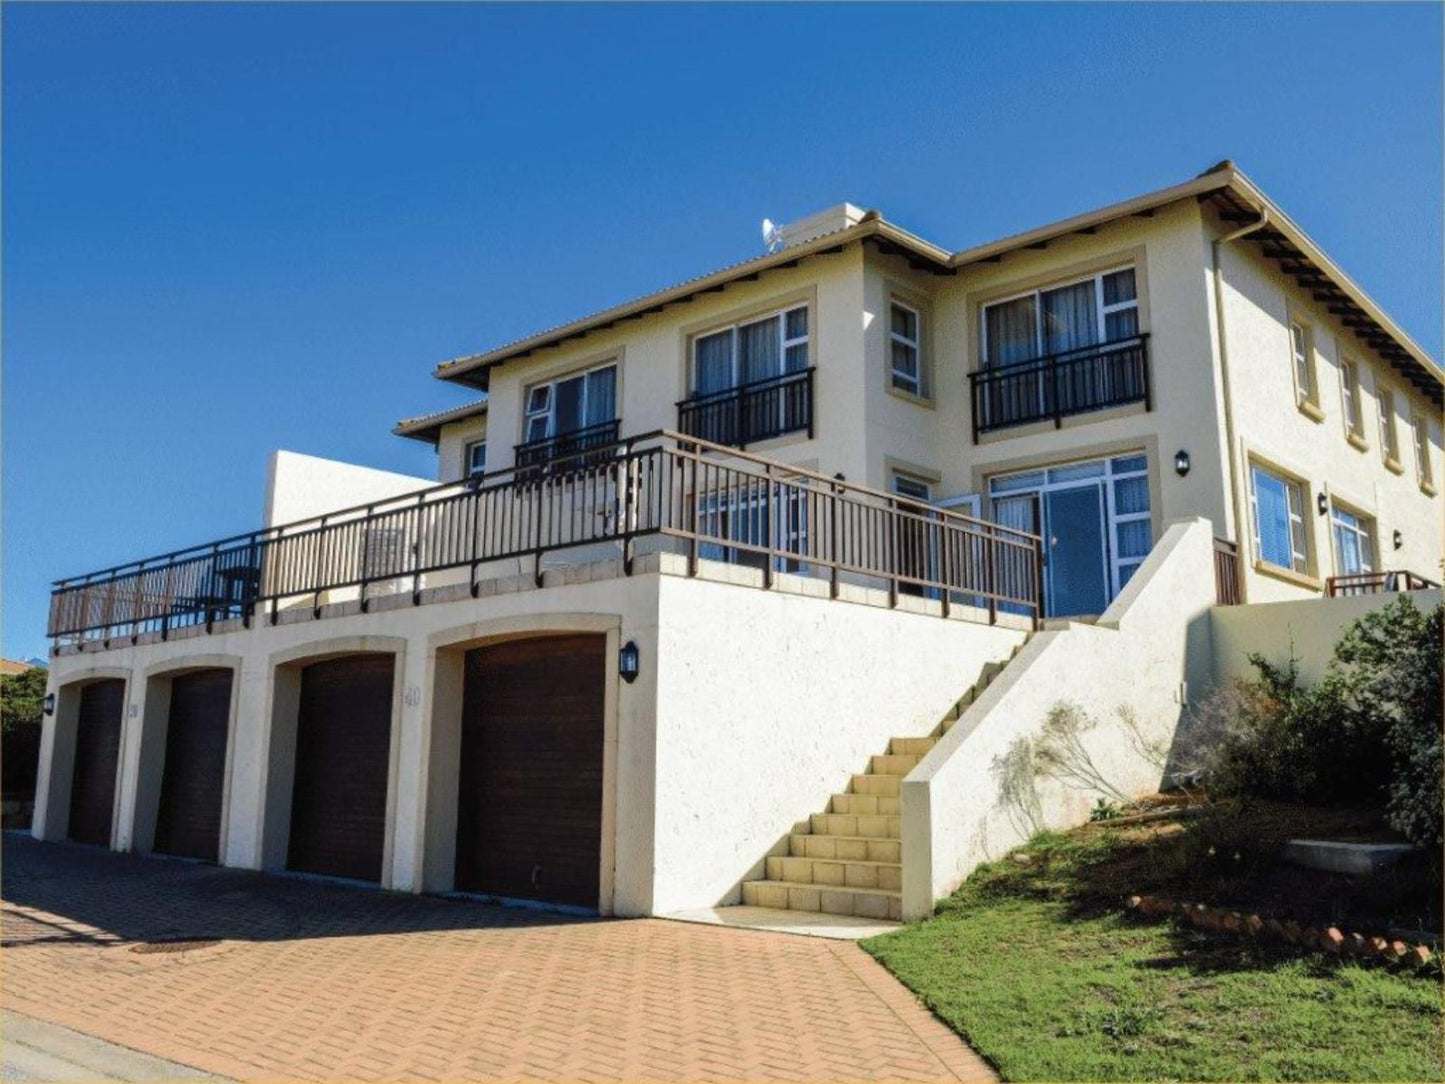 Leisure Rentals Pinnacle Point Golf Estate Pinnacle Point Mossel Bay Western Cape South Africa Complementary Colors, House, Building, Architecture